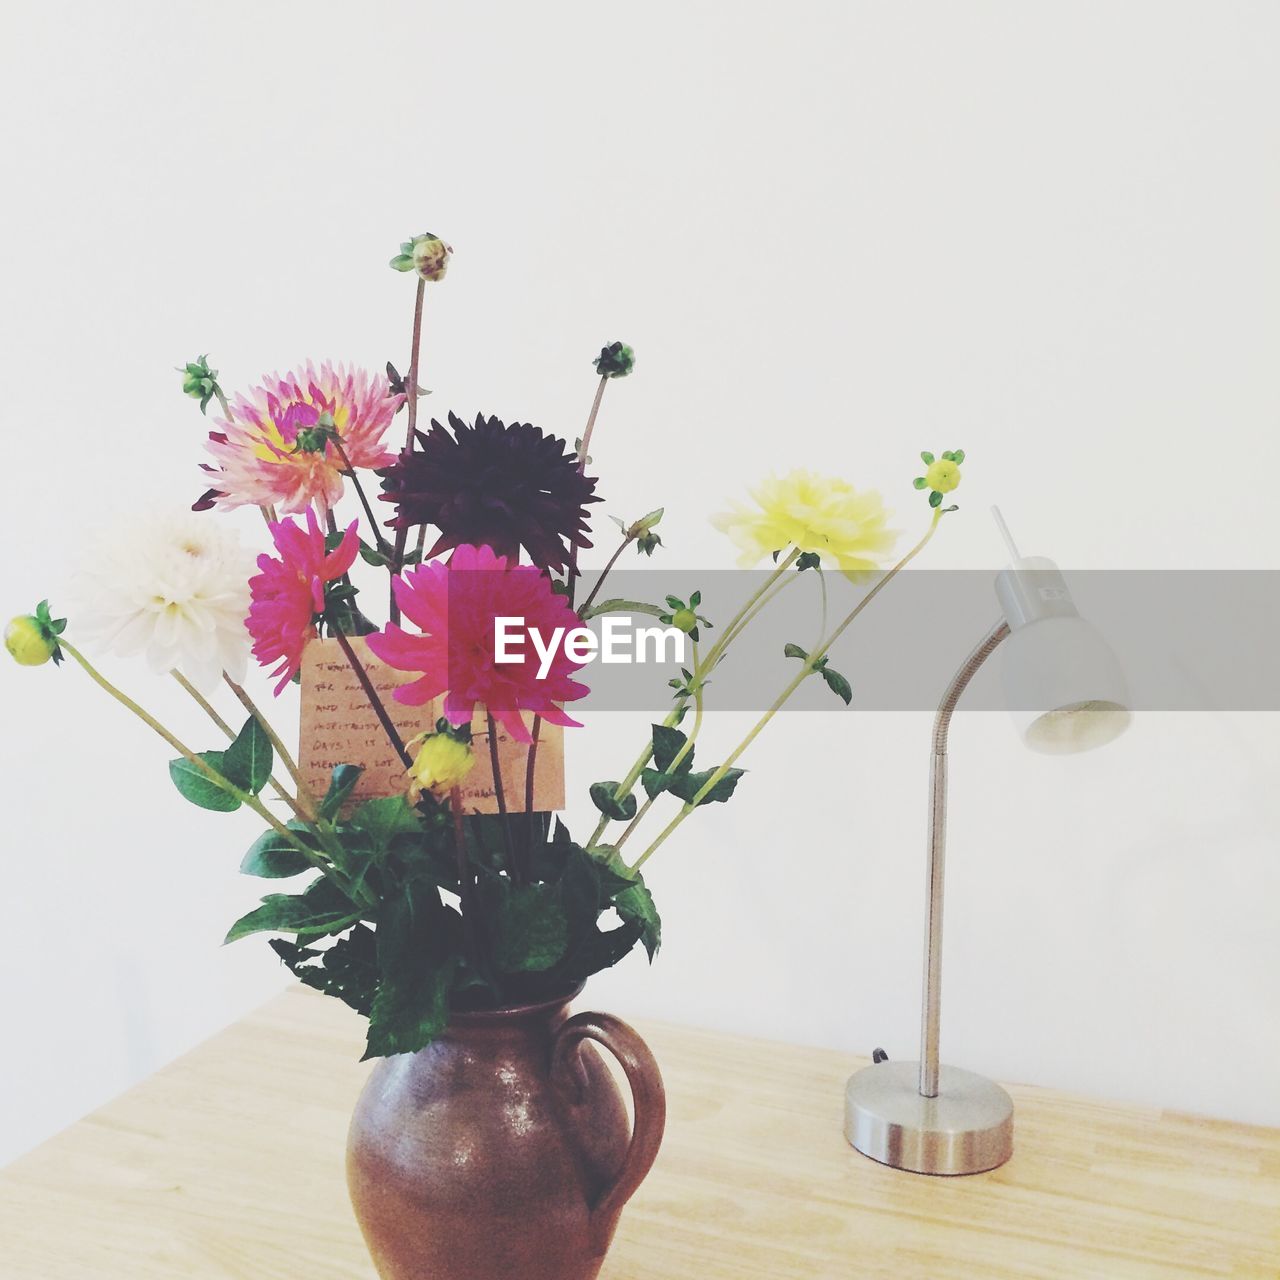 Flowers with message in vase on table